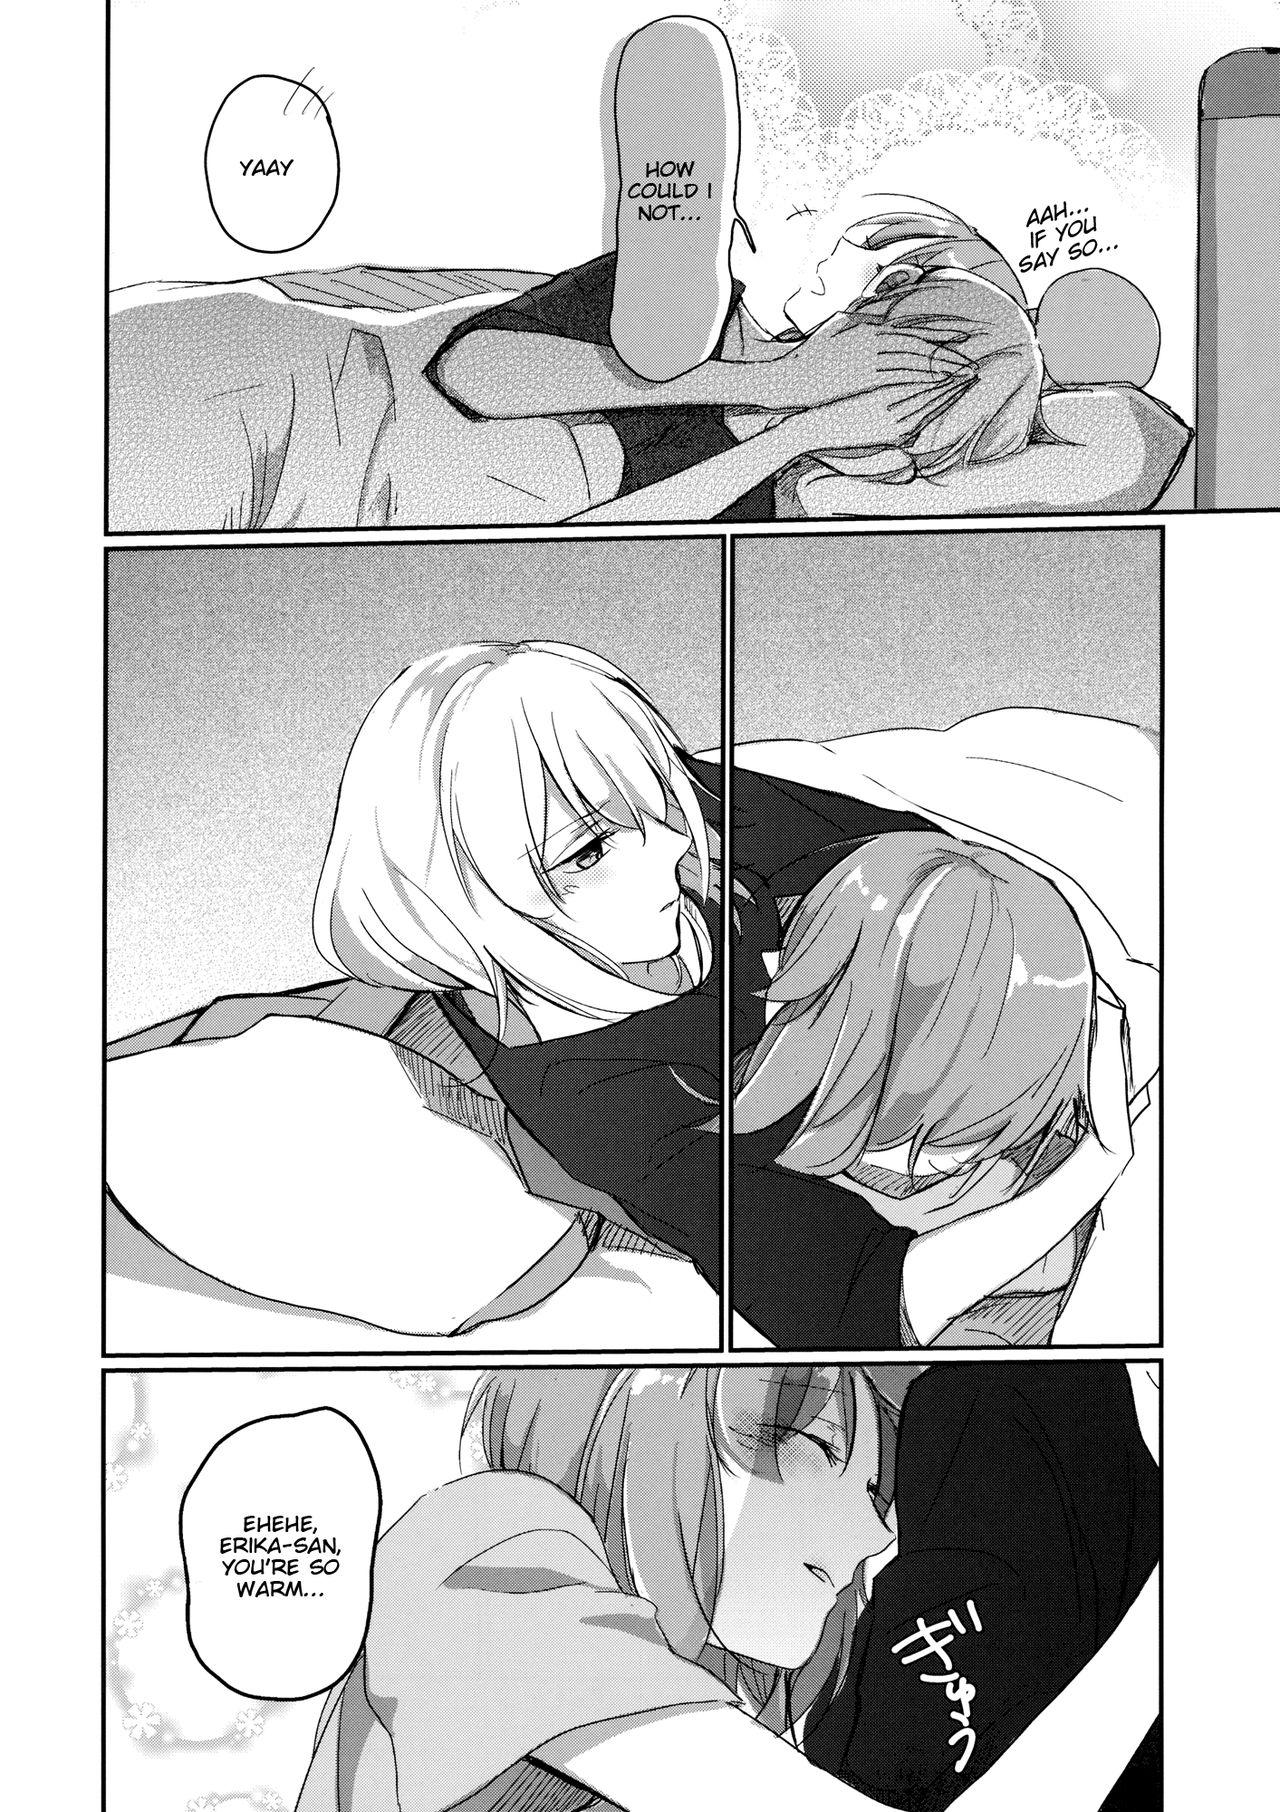 Teenage Porn for the first time - Girls und panzer Dildos - Page 9